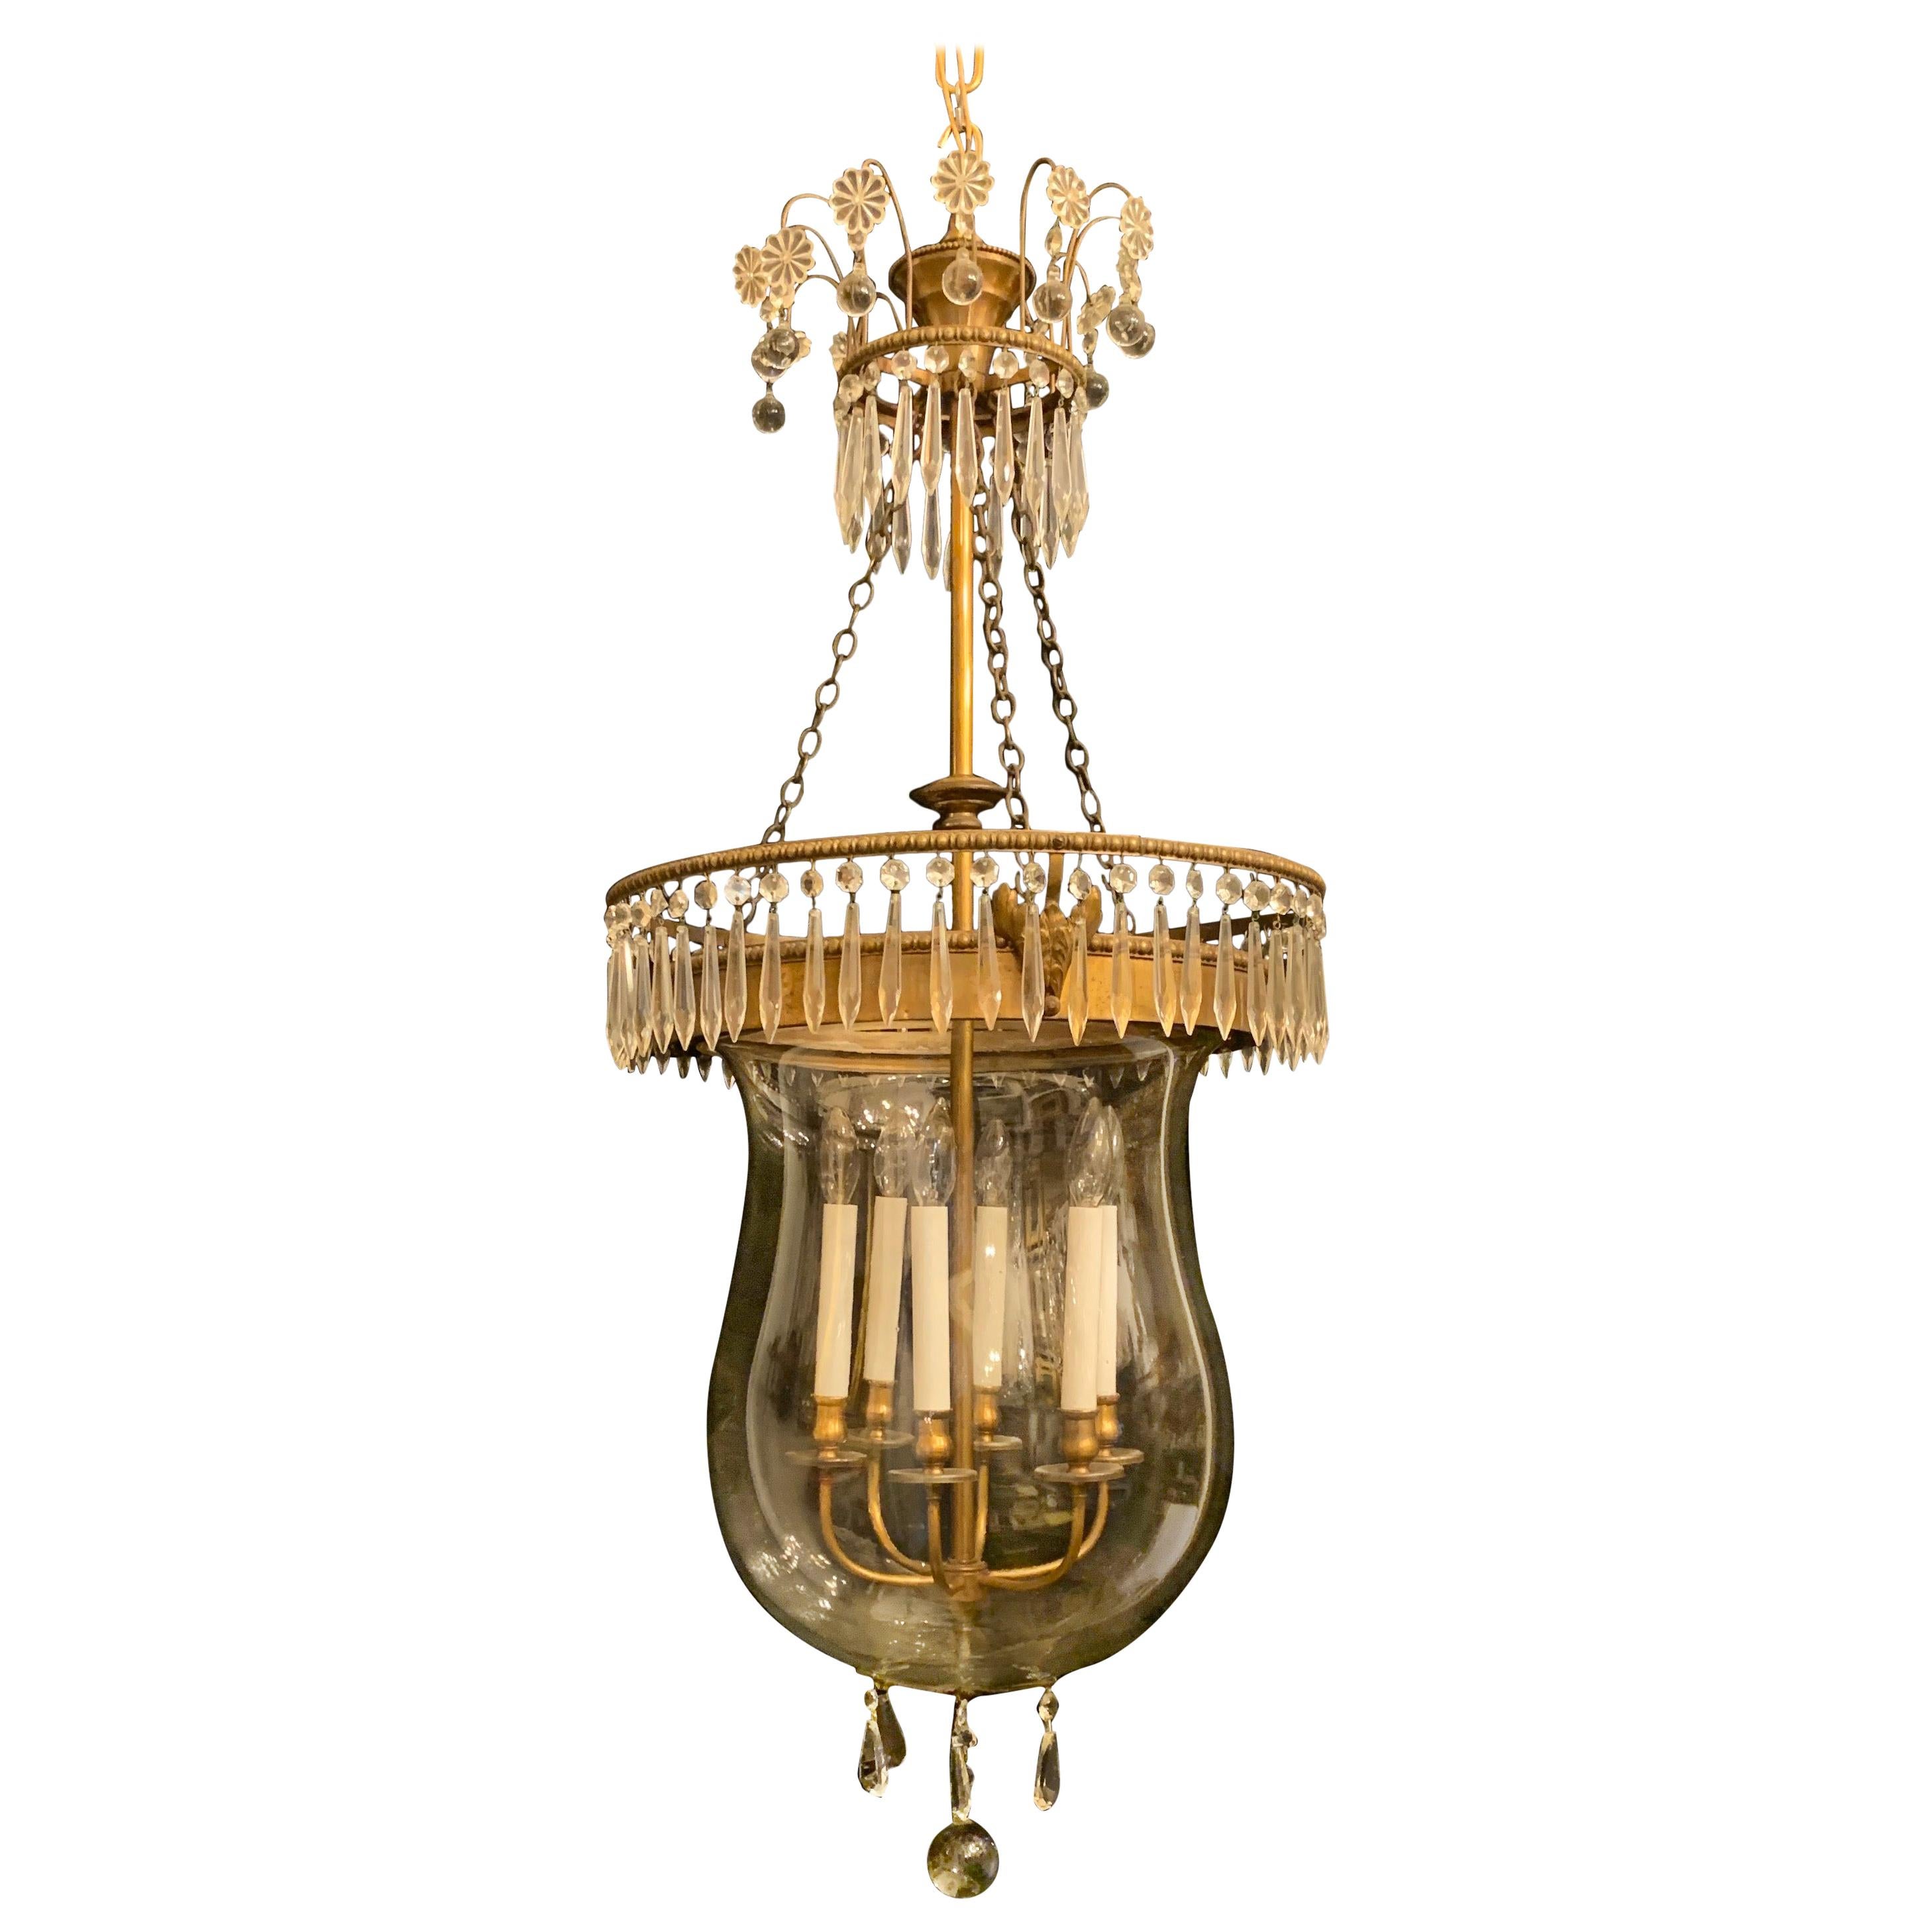 Wonderful French Neoclassical Large Empire Bronze Crystal Glass Bell Jar Lantern For Sale